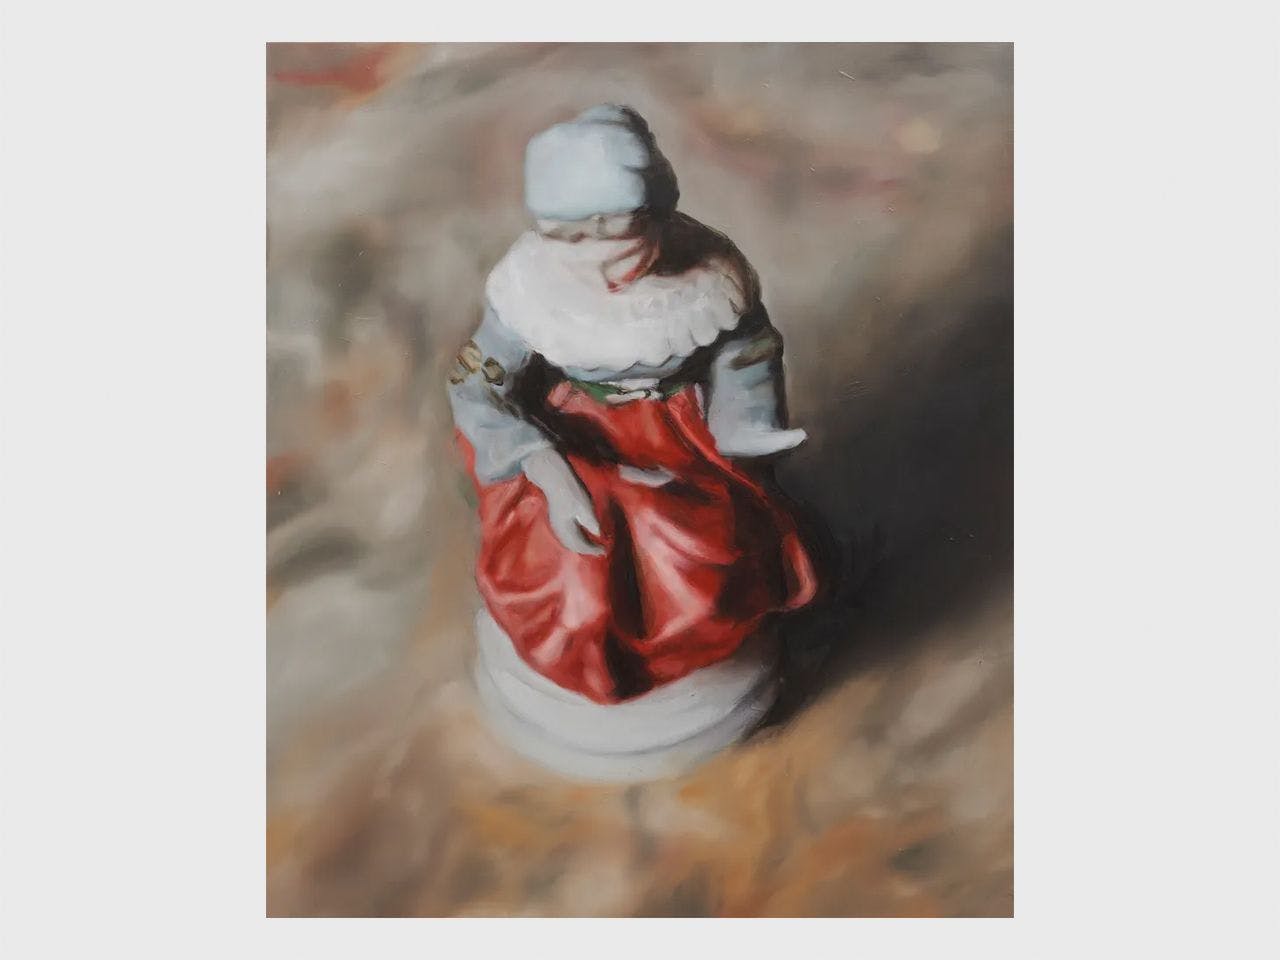 An artwork by Michael Borremans, titled The Glaze, dated 2007